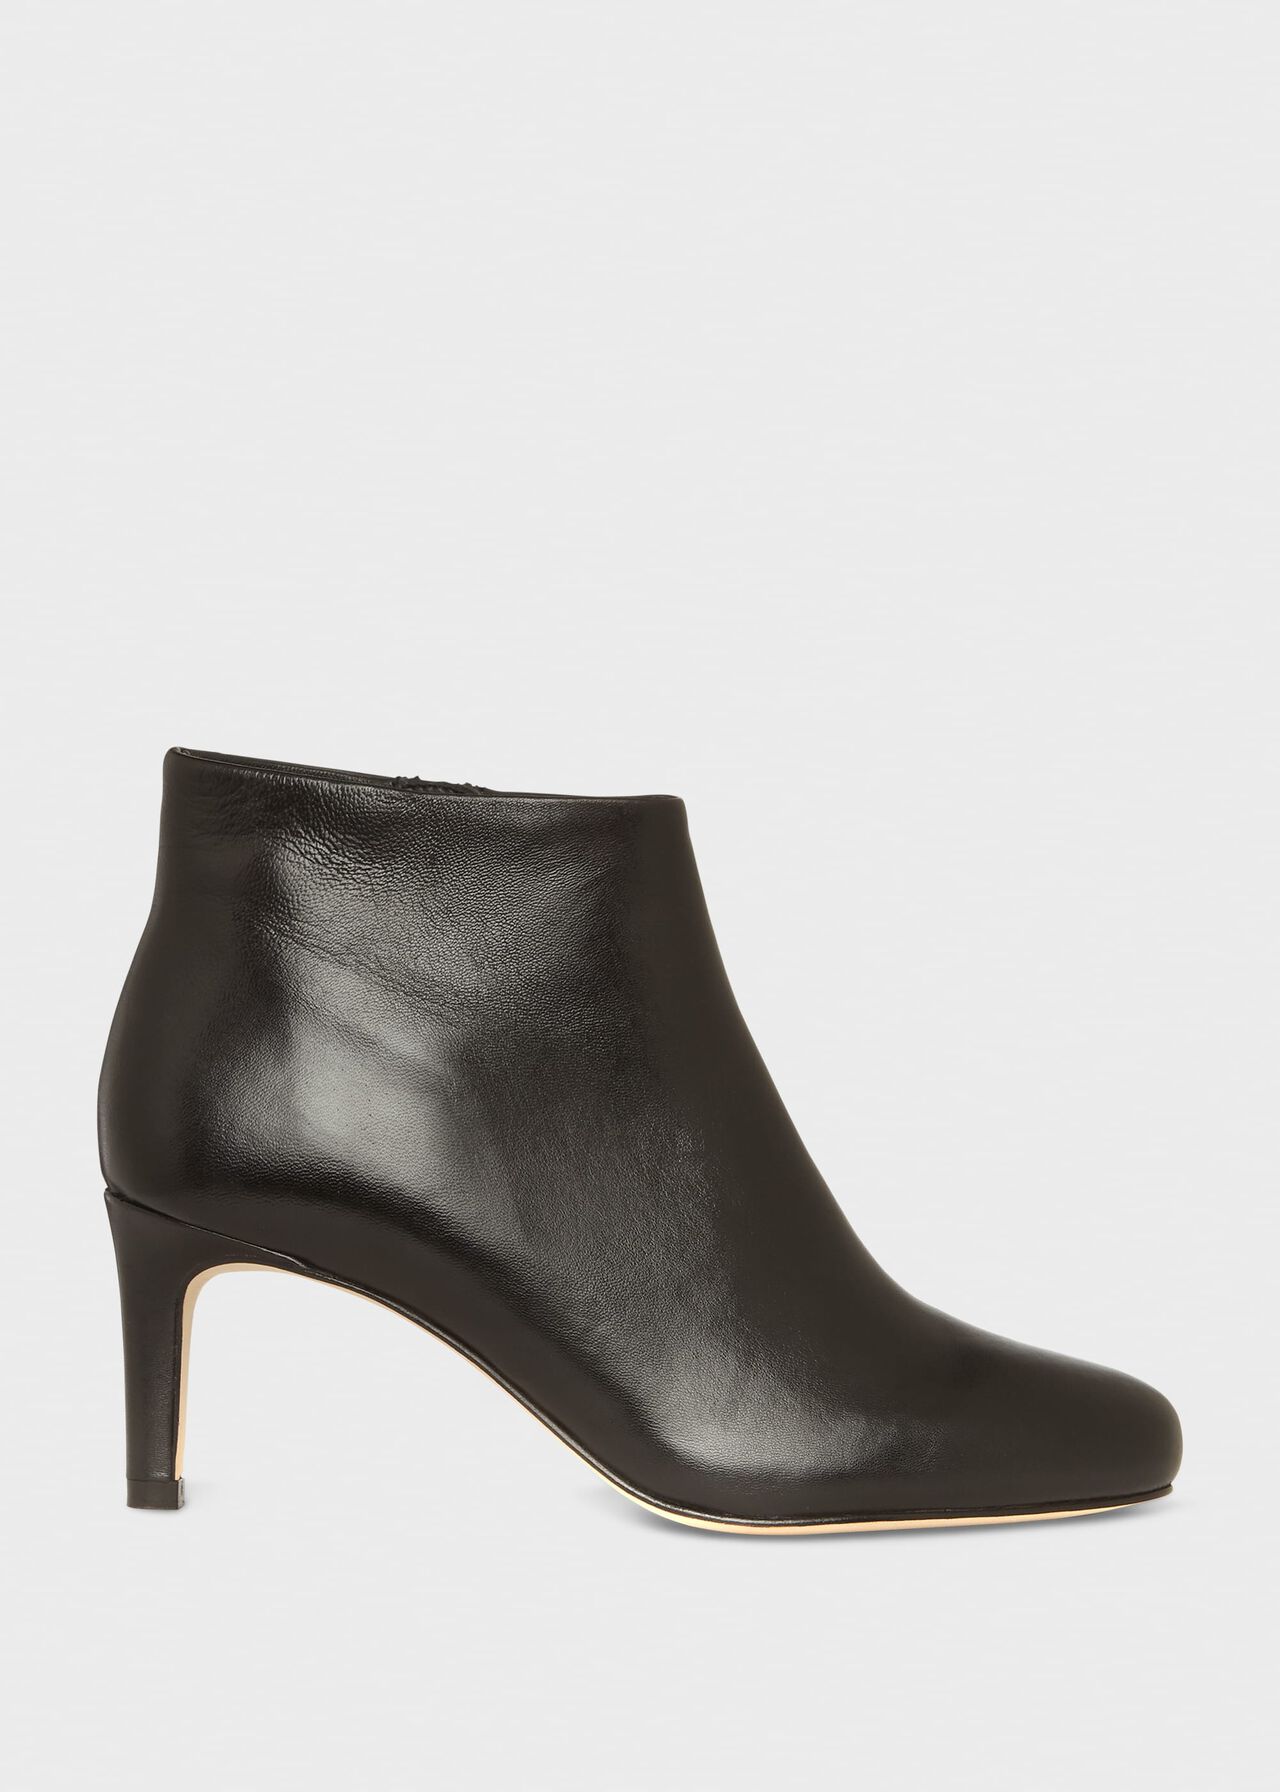 Lizzie Leather Ankle Boots, Black, hi-res